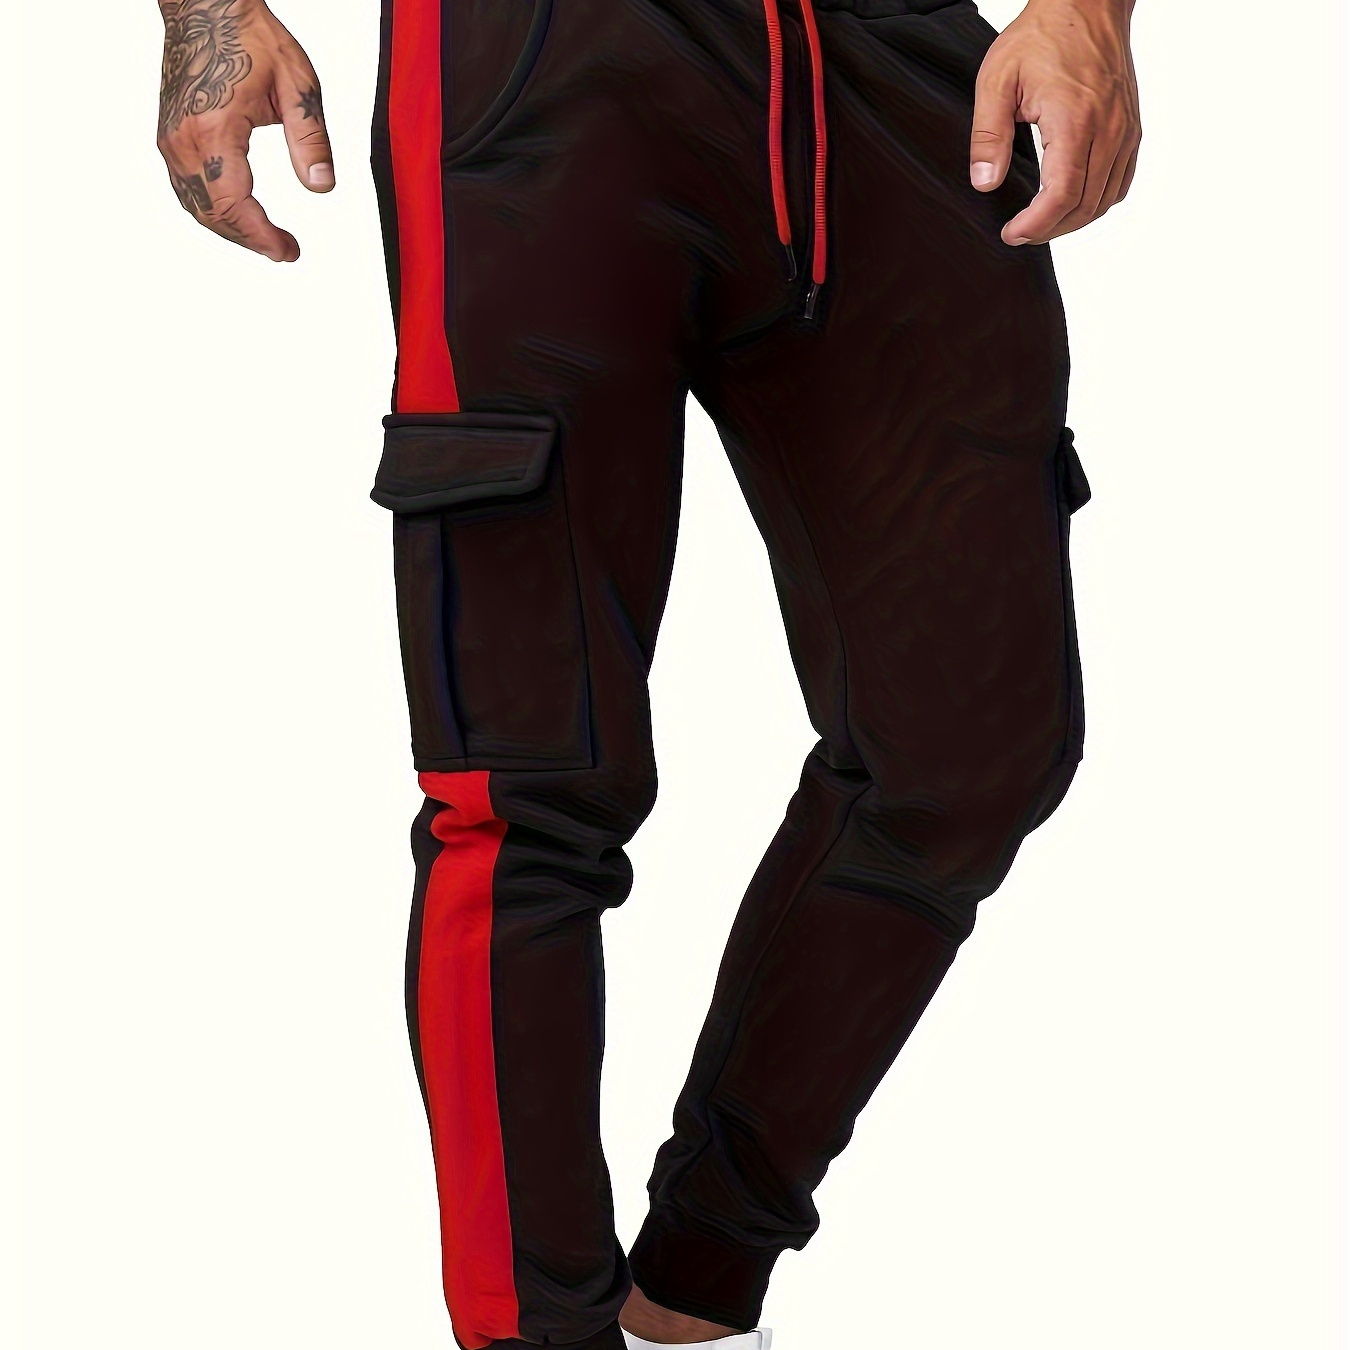 

Men's Drawstring Color Matching Overalls With Flip Pockets, Comfortable And Casual Jogging Pants